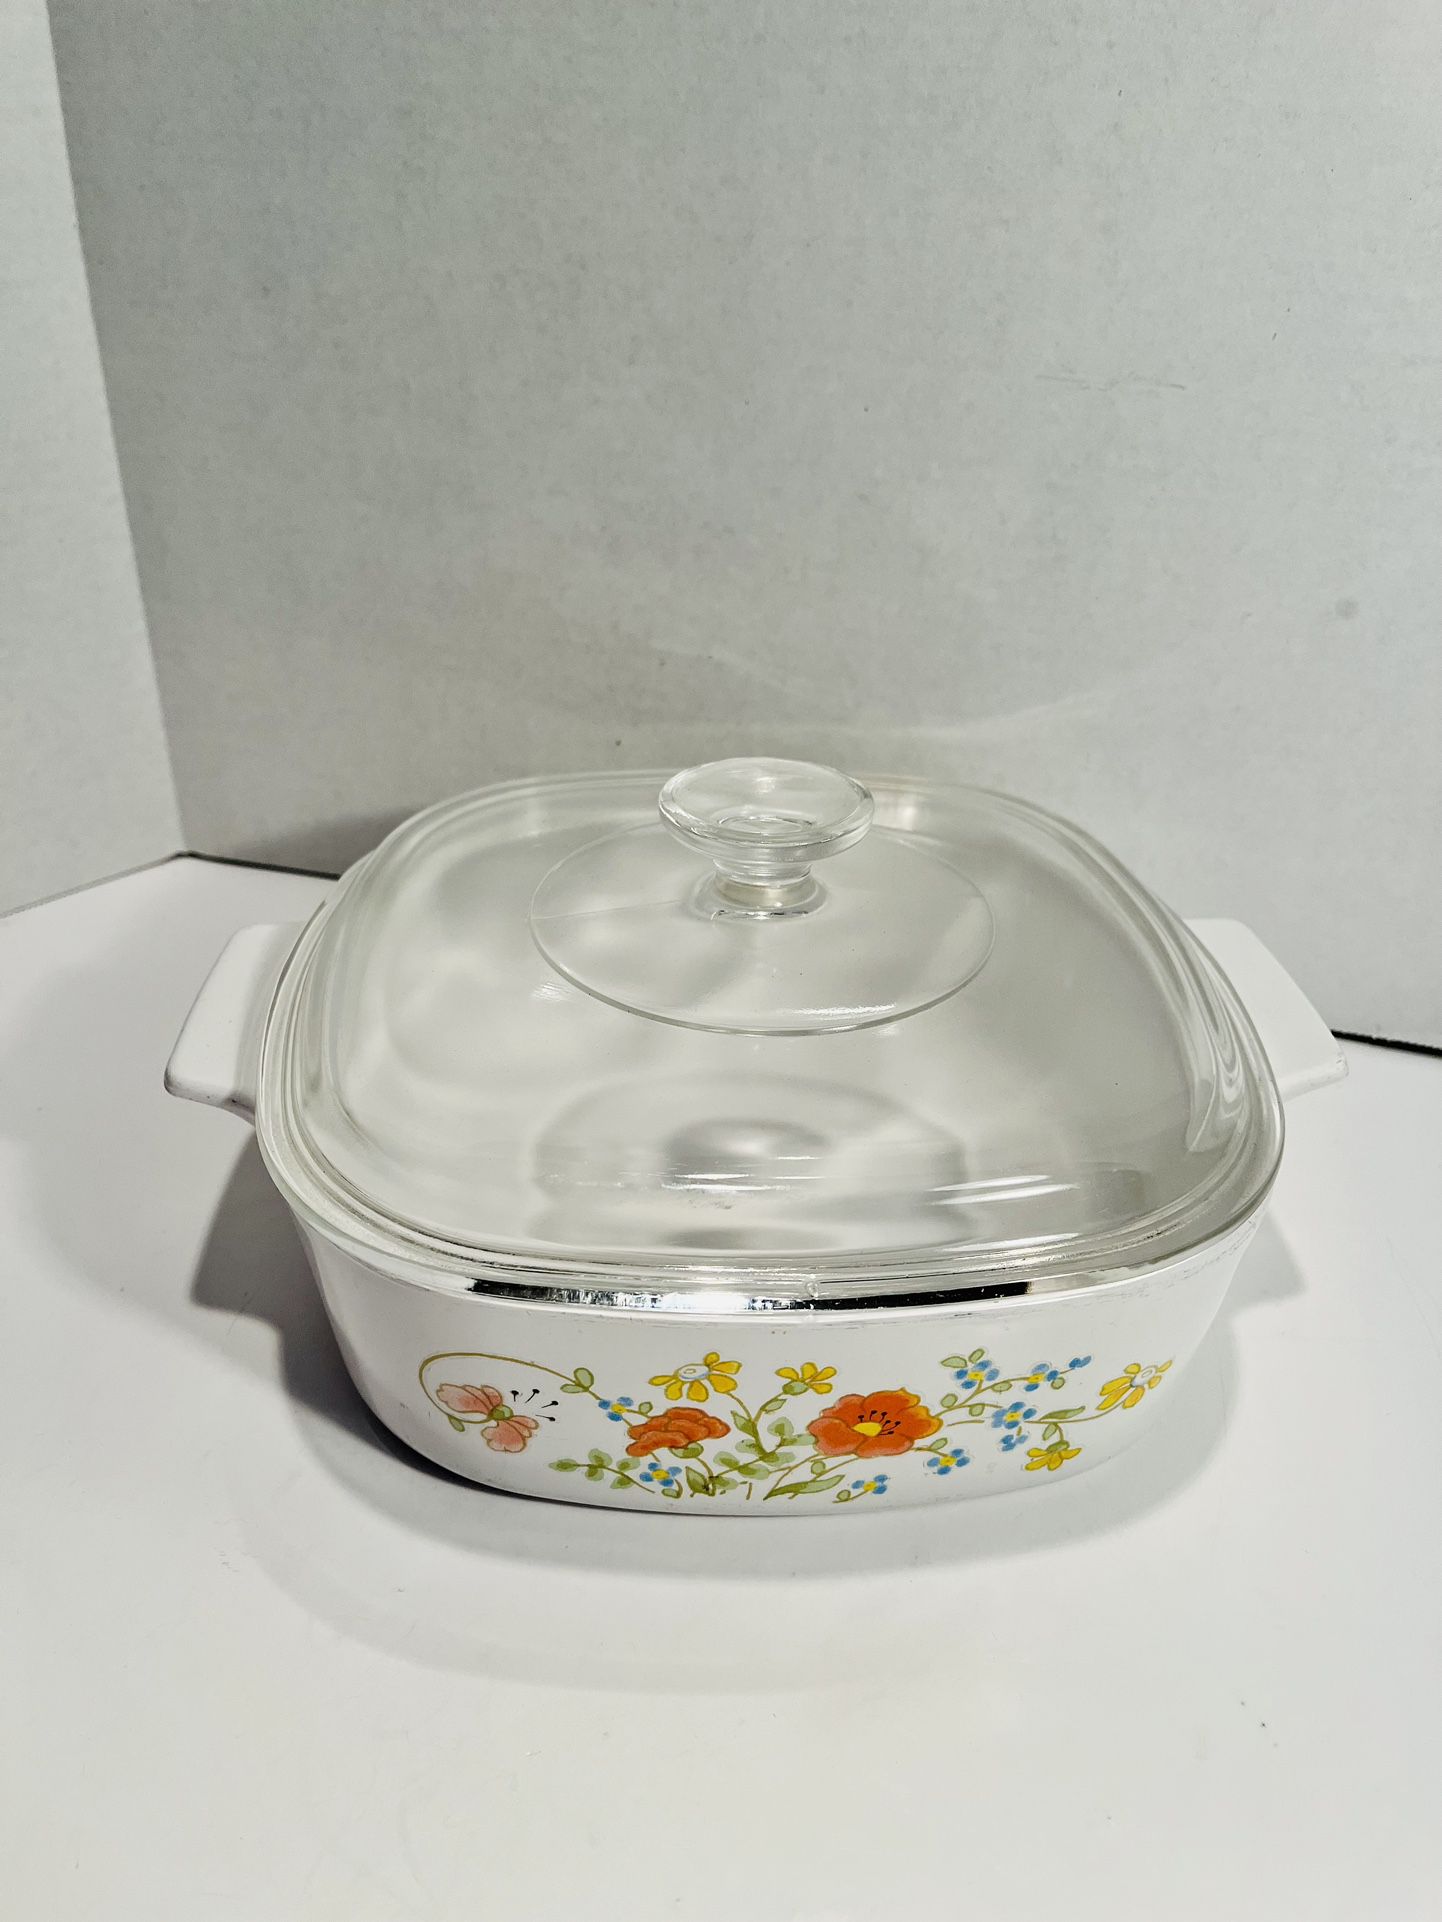 Vintage Corning Ware WILDFLOWER Casserole  Dish 2 QUART A-2-B with Lid!